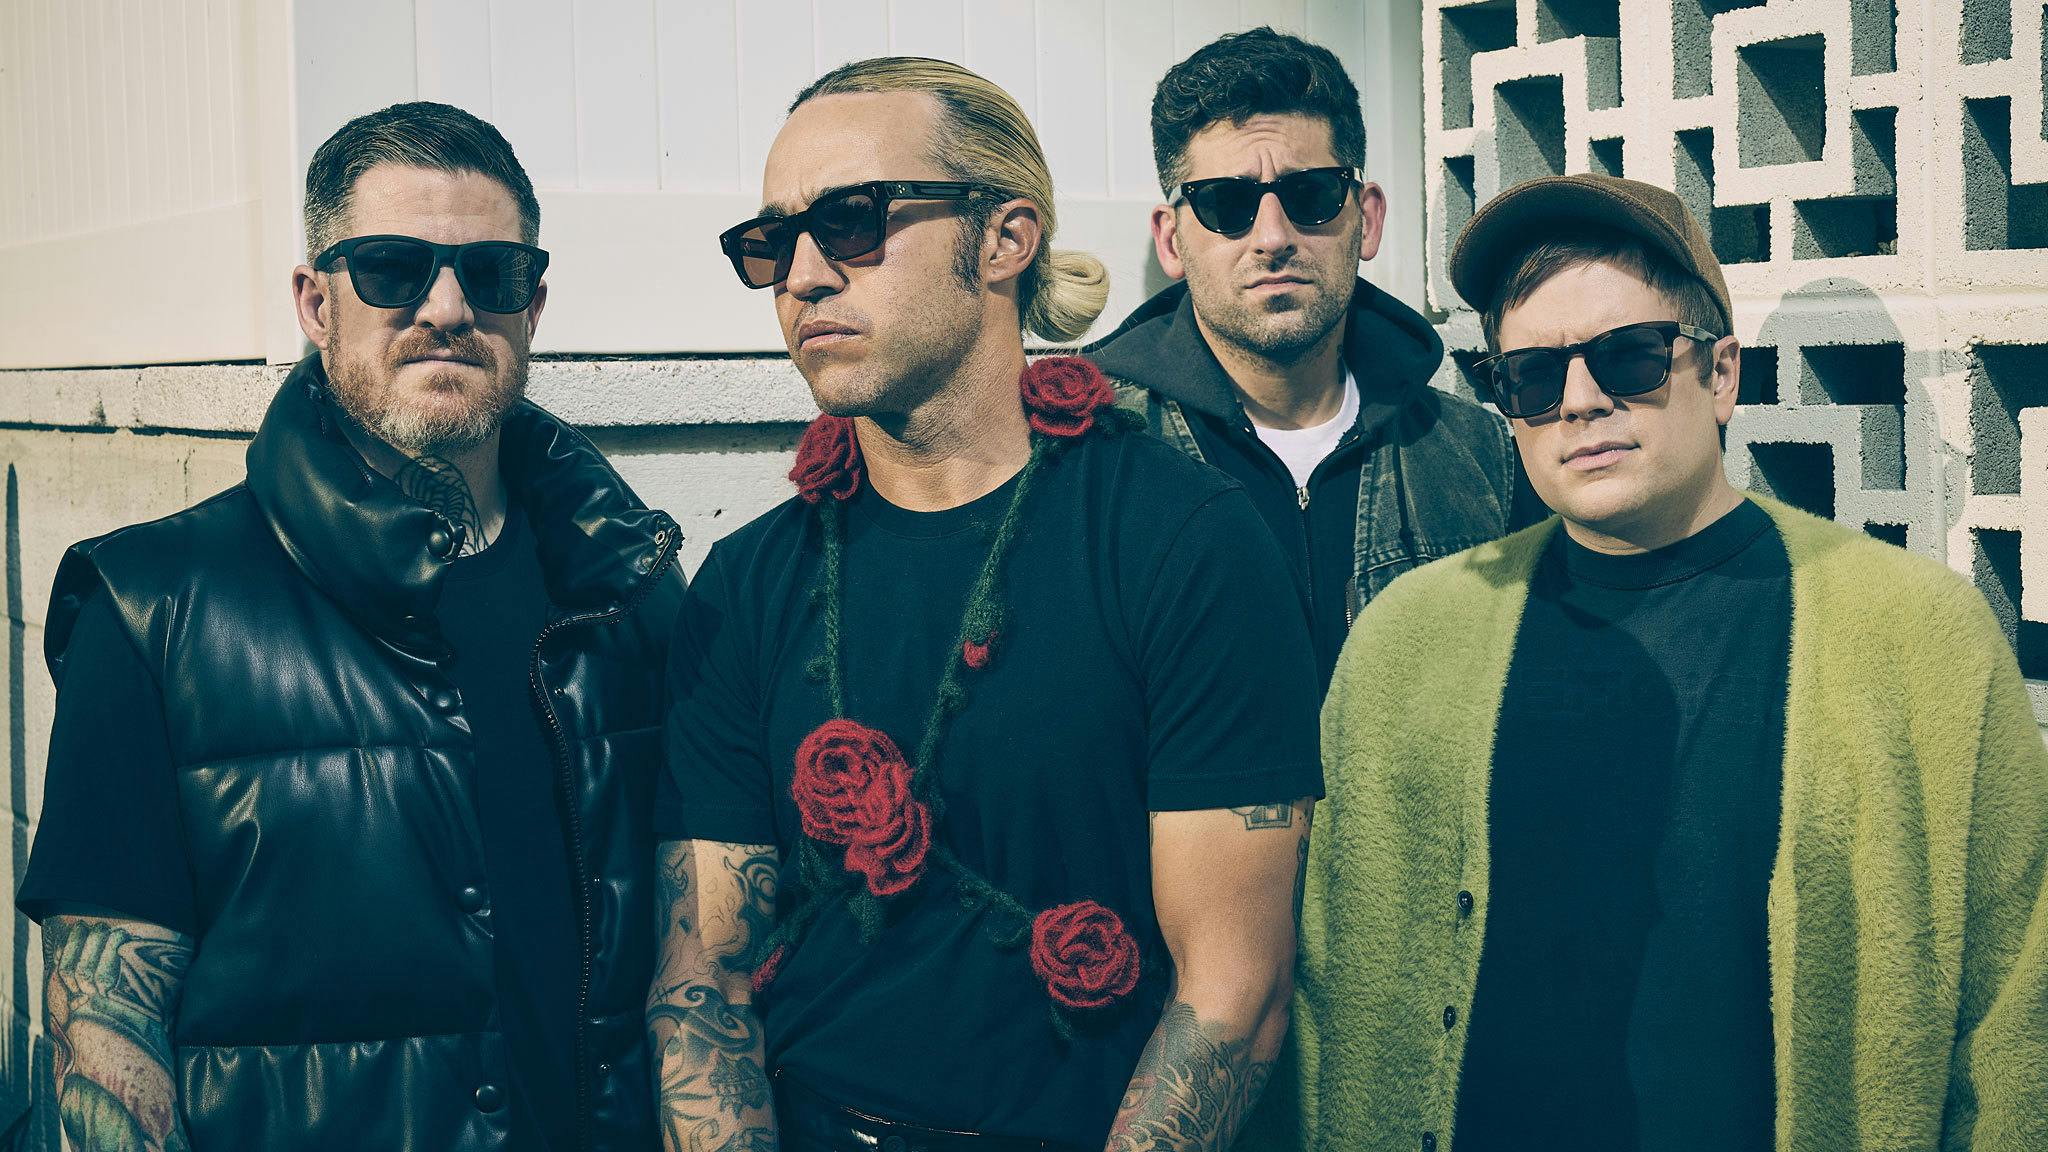 Watch: Fall Out Boy covered Nothing Compares 2 U last night